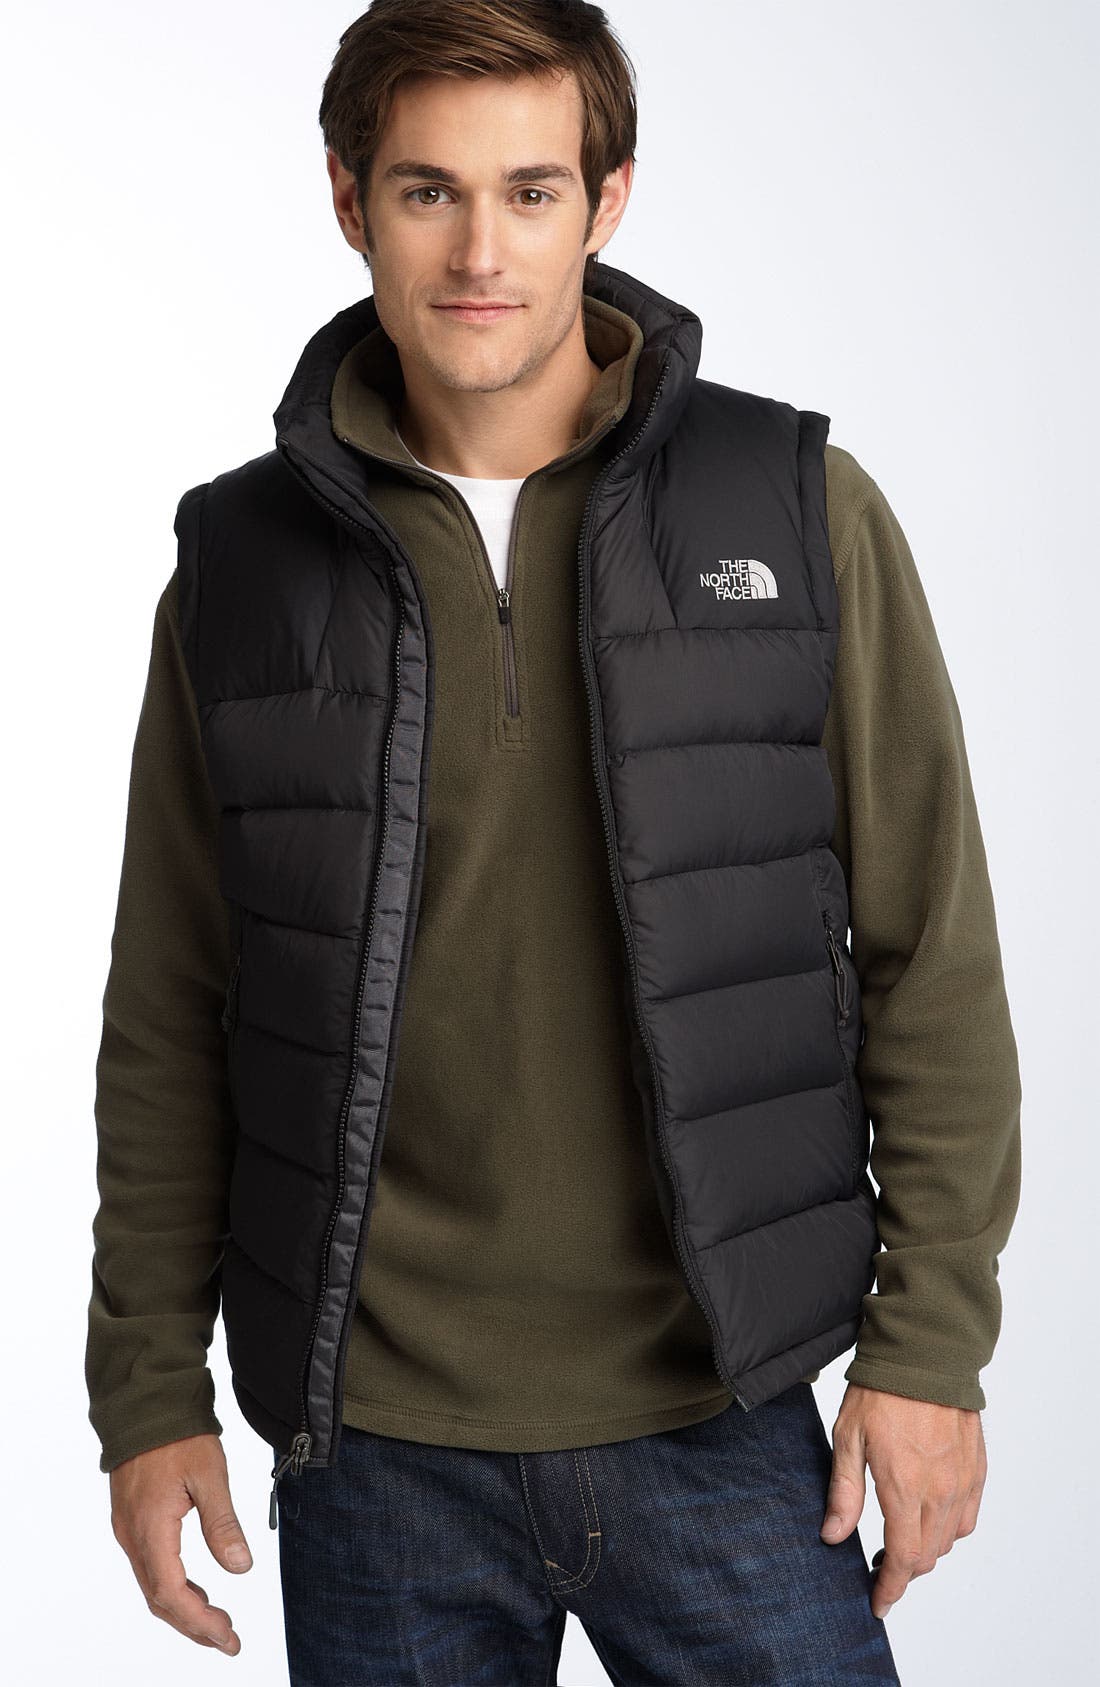 The North Face 'Massif' Down Vest 